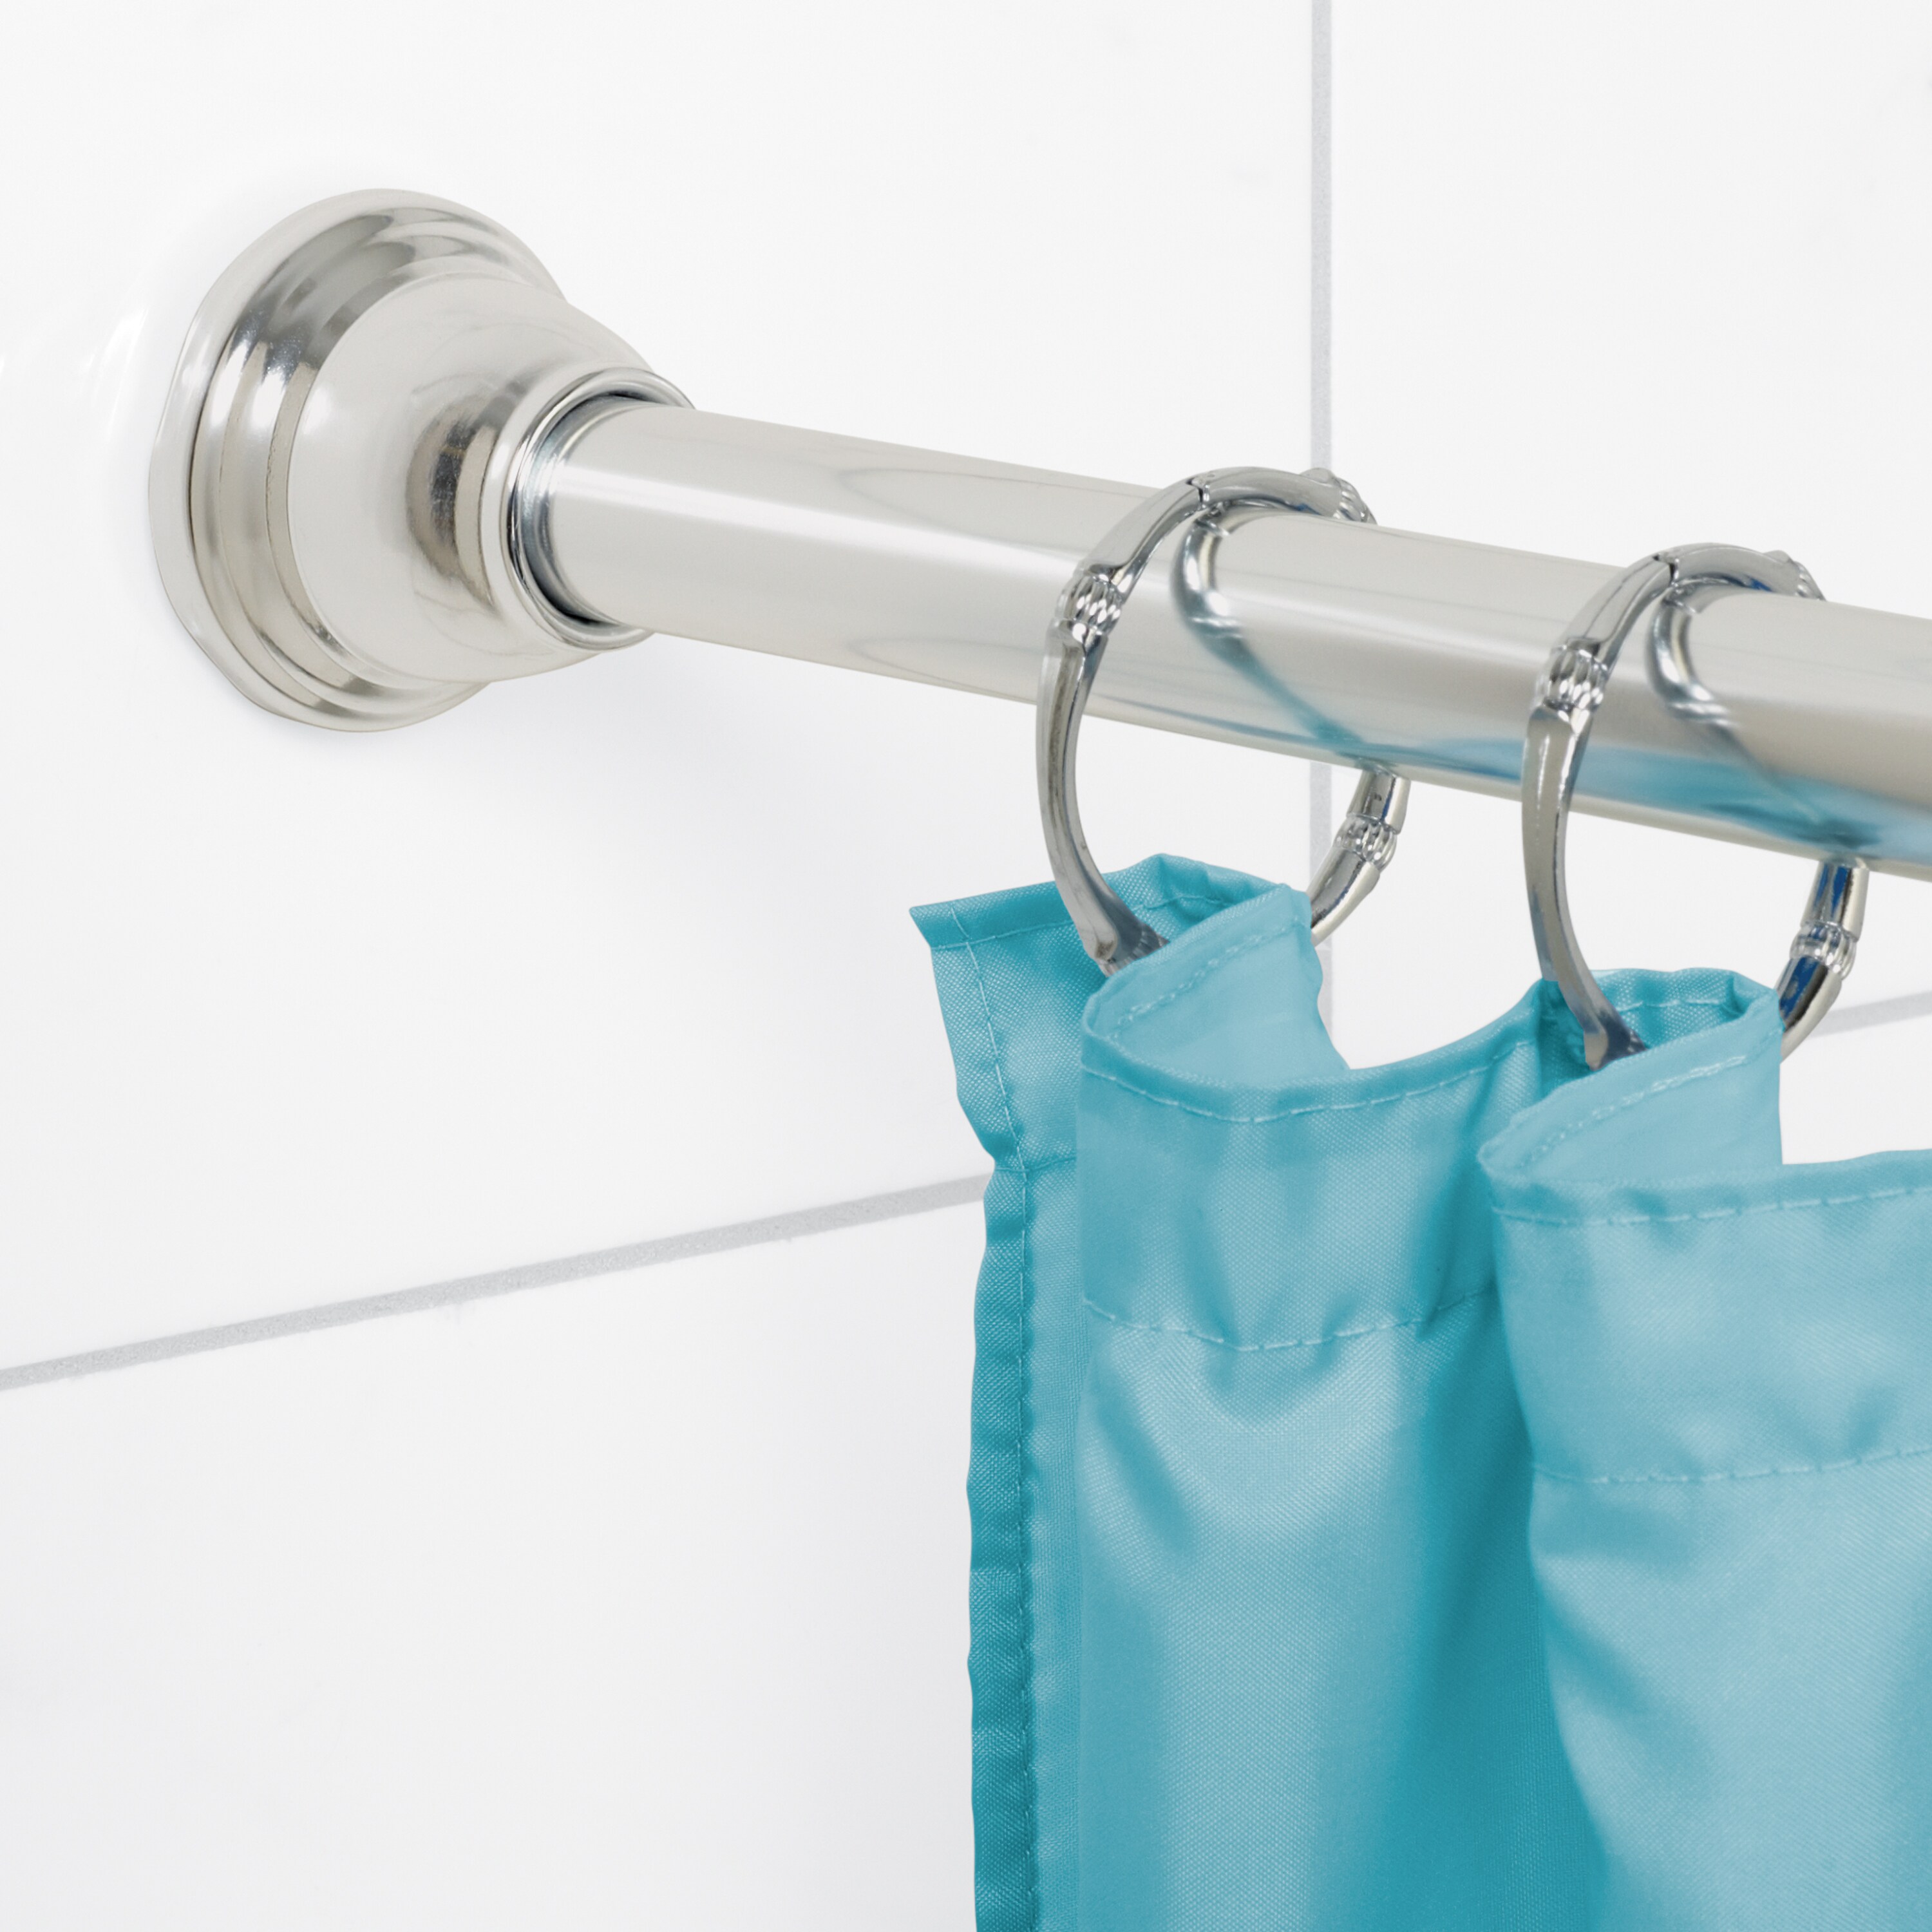 Single Straight Shower Rod, How To Fix A Broken Shower Curtain Rod